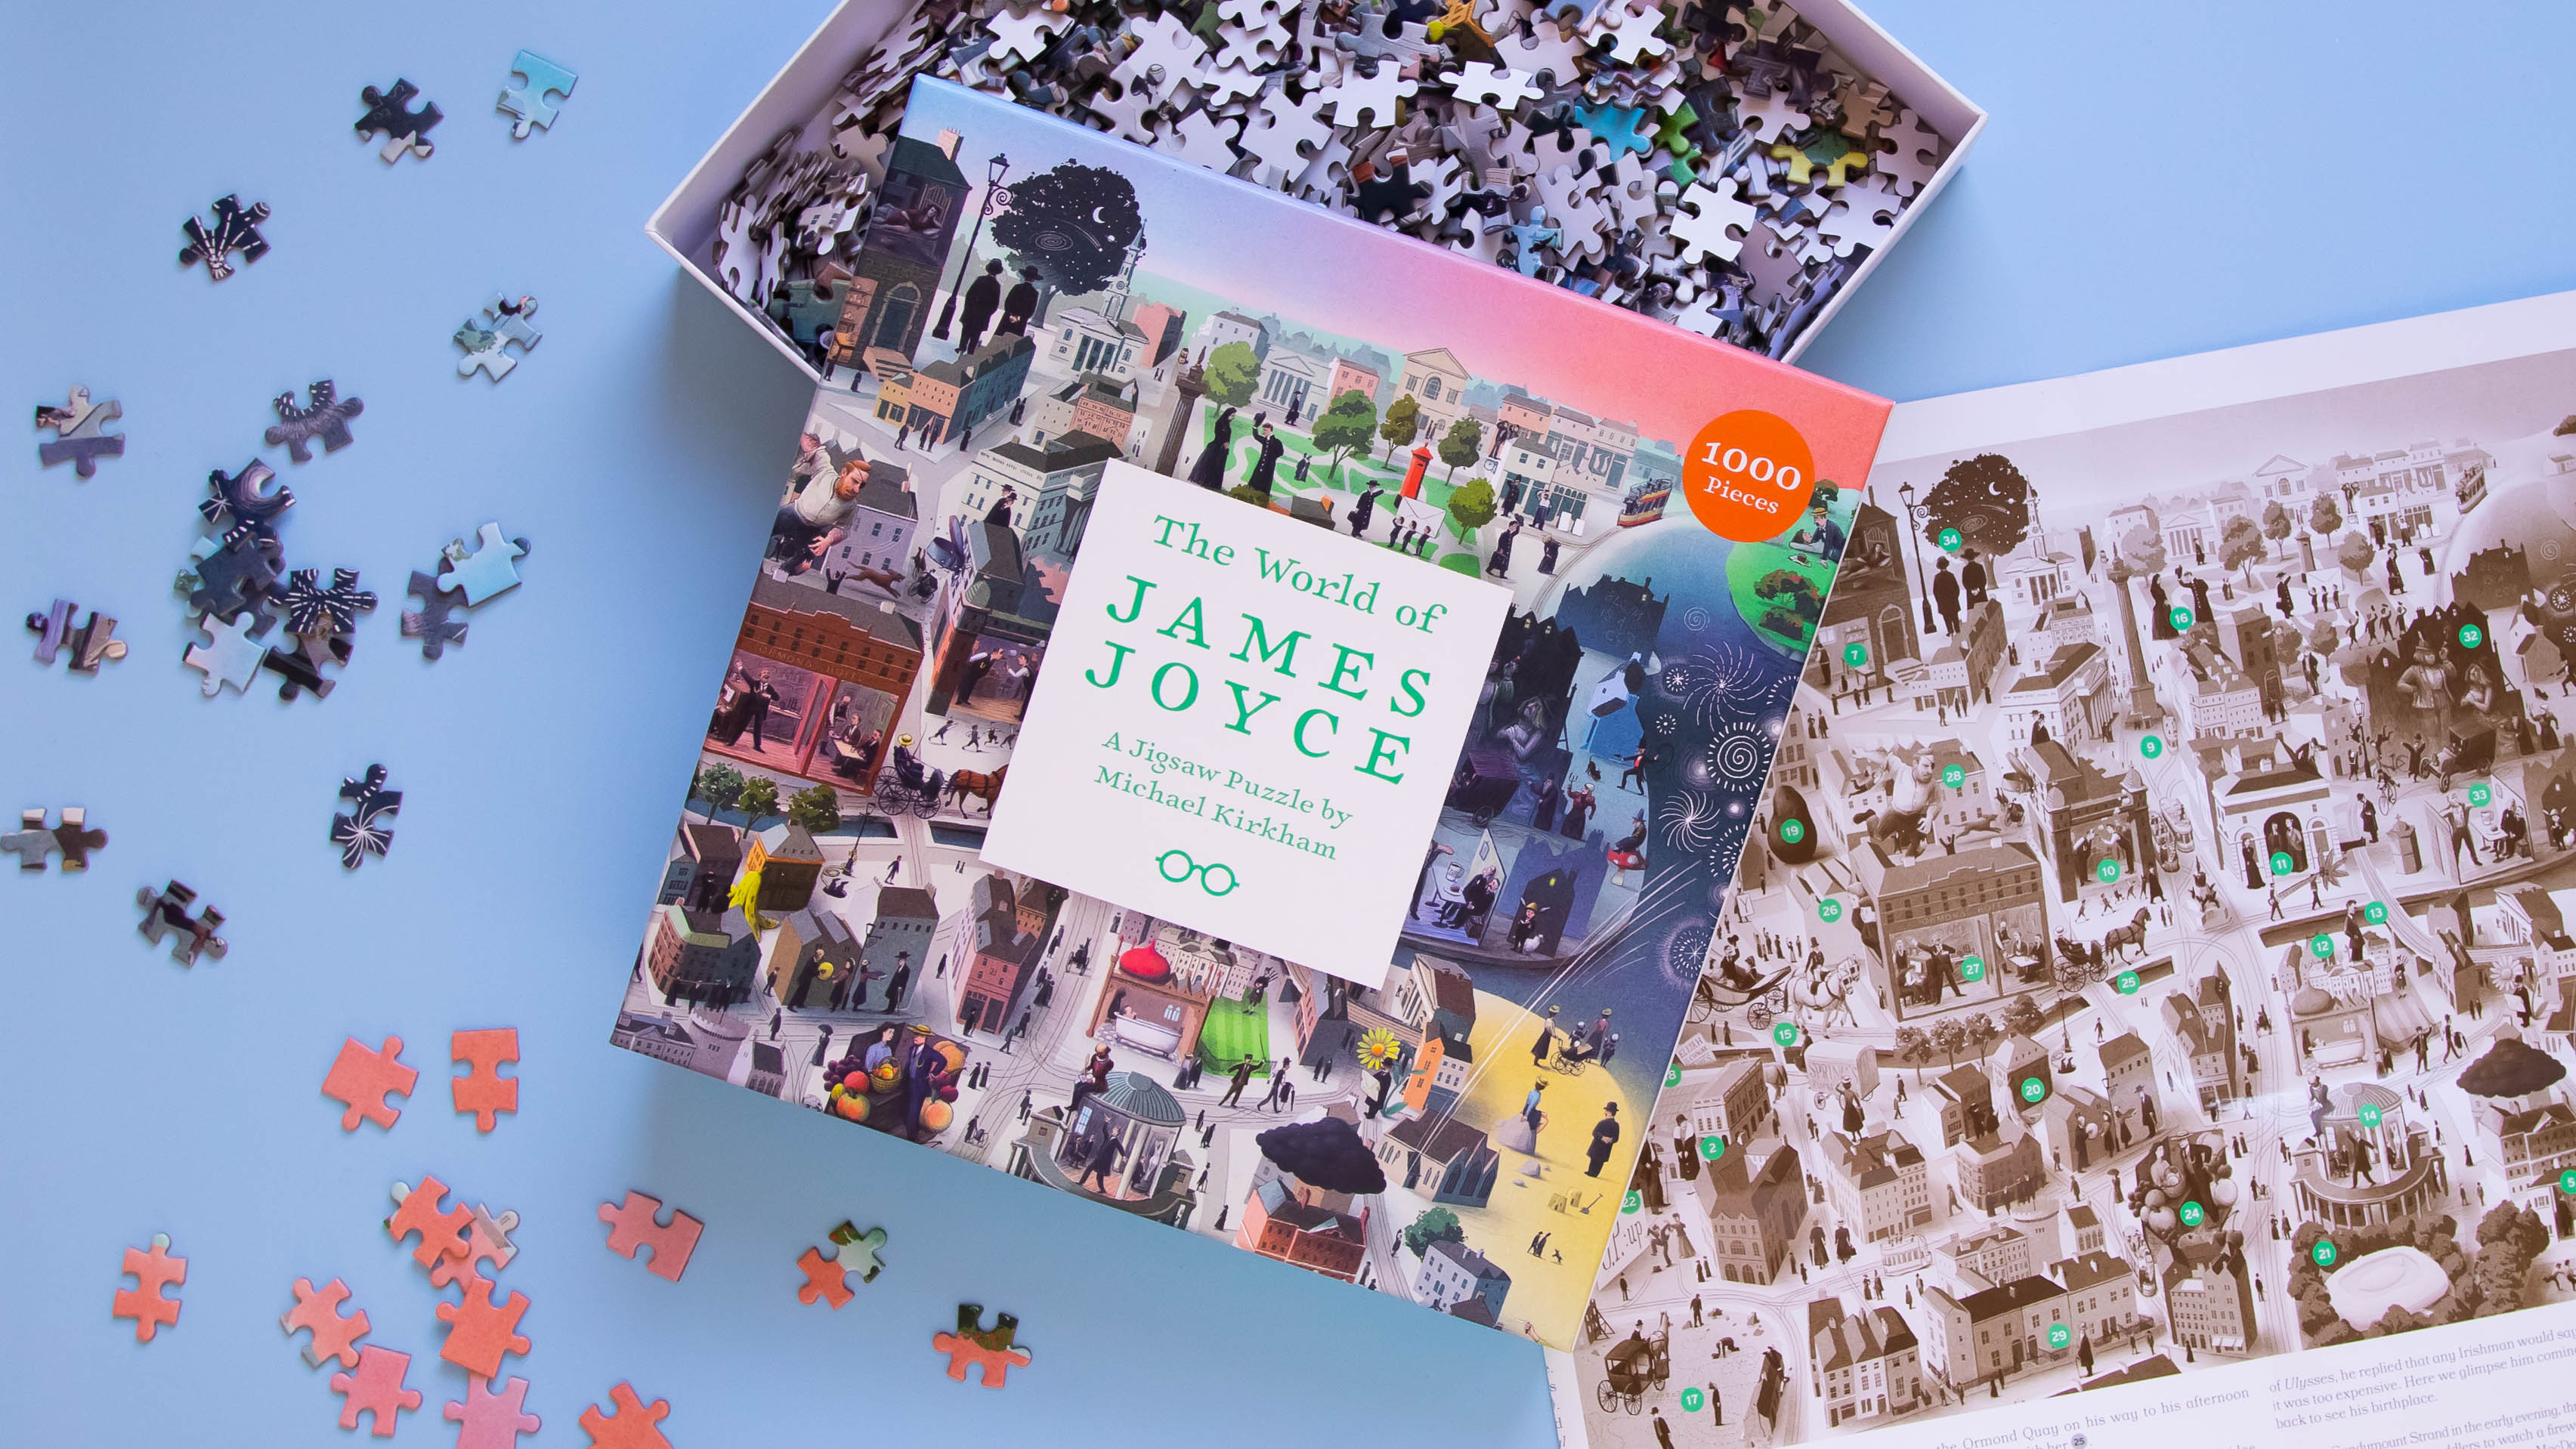 The World of James Joyce 1000 Piece Puzzle